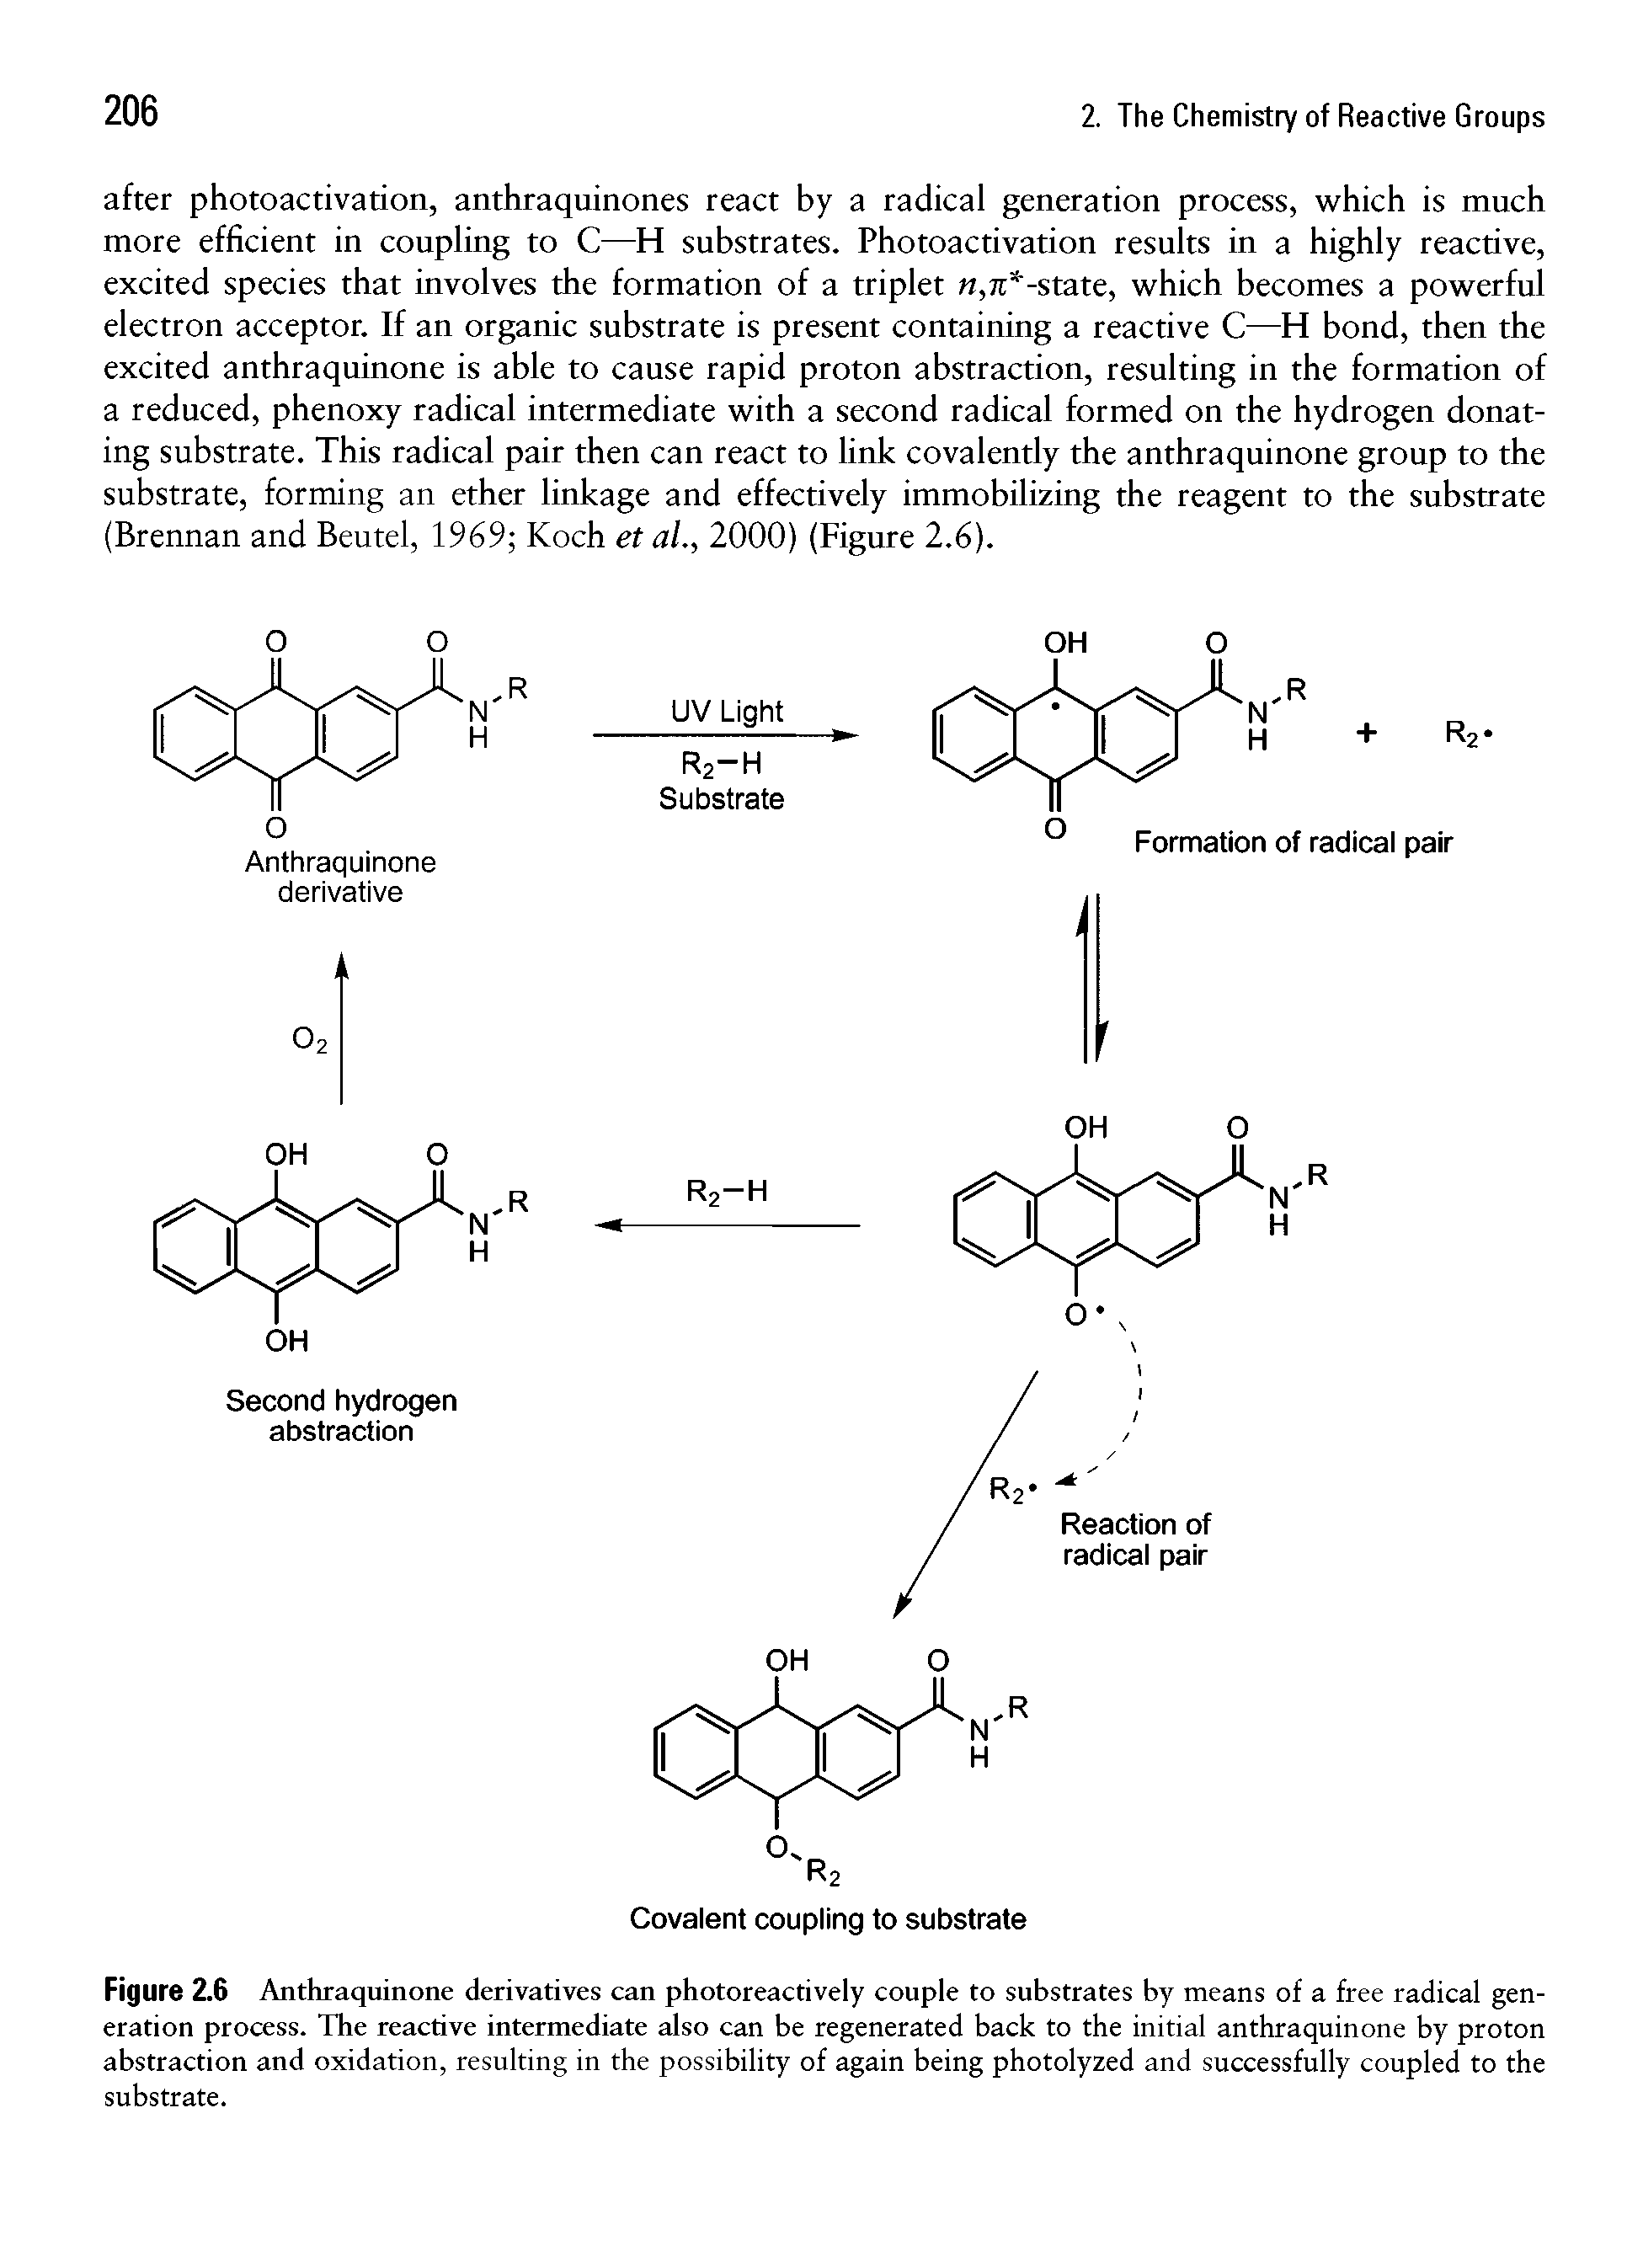 Figure 2.6 Anthraquinone derivatives can photoreactively couple to substrates by means of a free radical generation process. The reactive intermediate also can be regenerated back to the initial anthraquinone by proton abstraction and oxidation, resulting in the possibility of again being photolyzed and successfully coupled to the substrate.